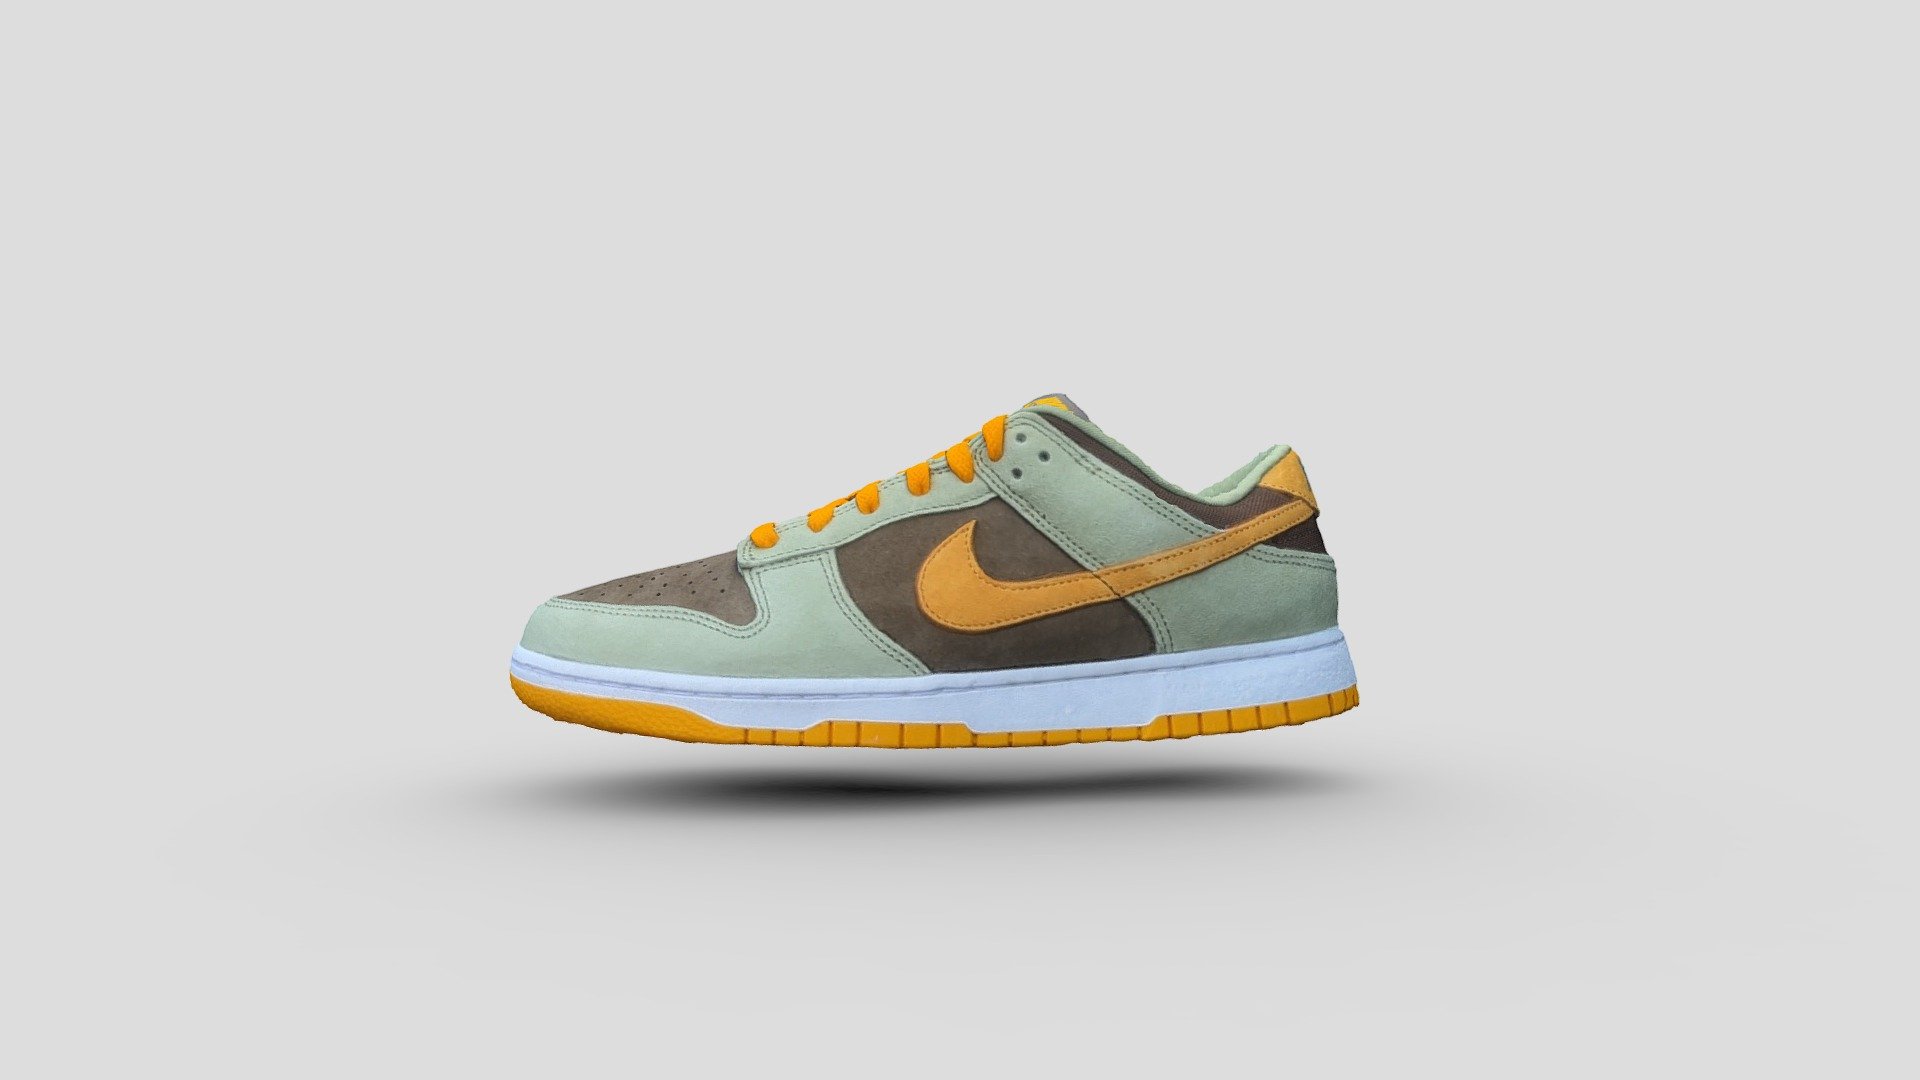 Please enjoy!

(Created in RealityCapture from a 45 second iphone video

Nike - dh5360 300 | dusty olive/pro gold | 6/17/21)

I am excited to share my models with you for free and would be happy to know what you might use them for, shoot me an email ryanbairess@gmail.com. 

Thank you for looking 3d model